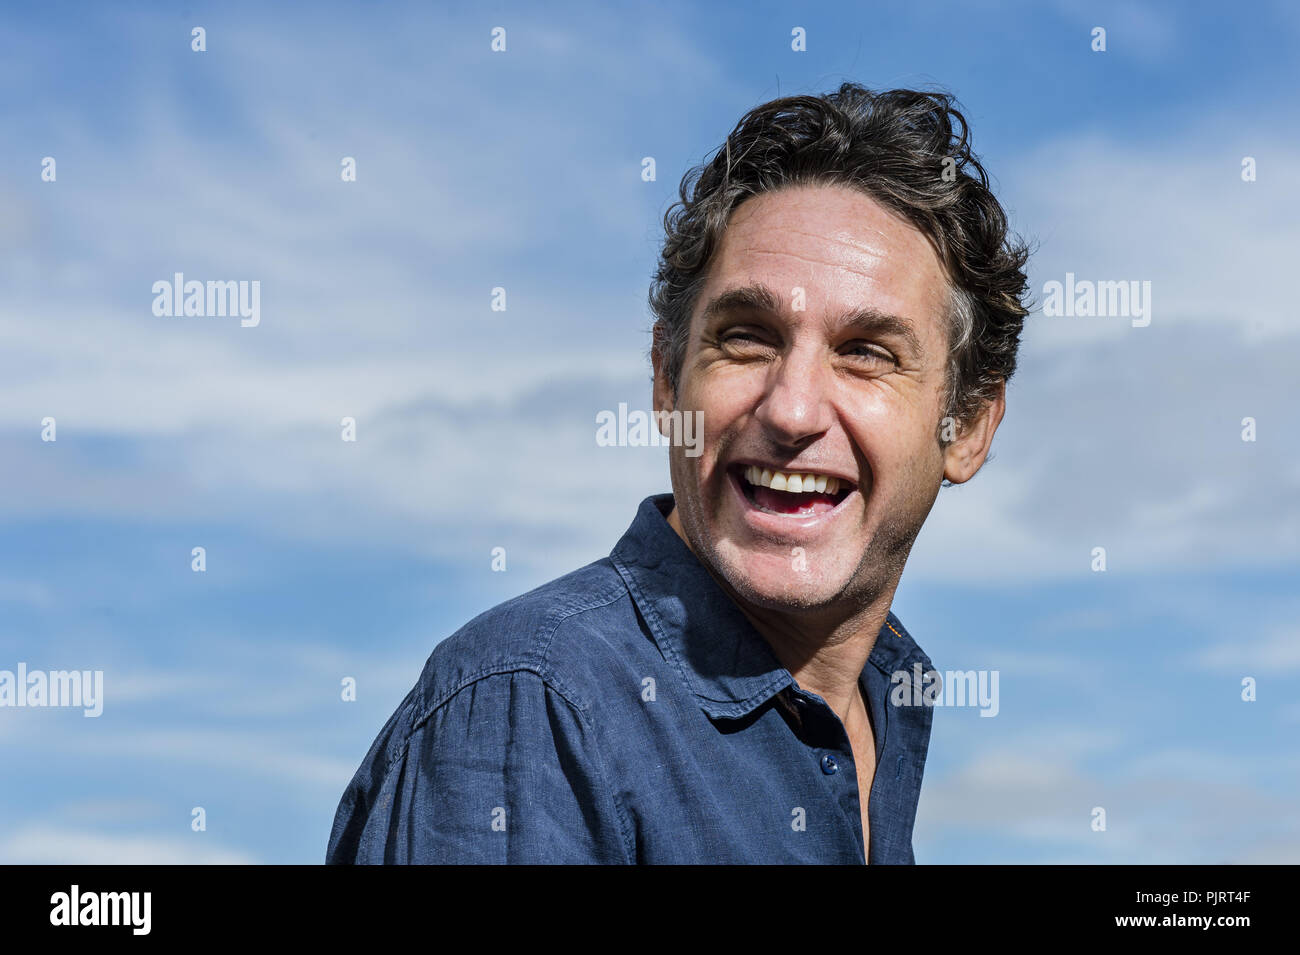 Canadian comedian Tom Stade is performing shows "I swear to....." during  Edinburgh's fringe festival Featuring: Tom Stade Where: Edinburgh, United  Kingdom When: 08 Aug 2018 Credit: Euan Cherry/WENN Stock Photo - Alamy